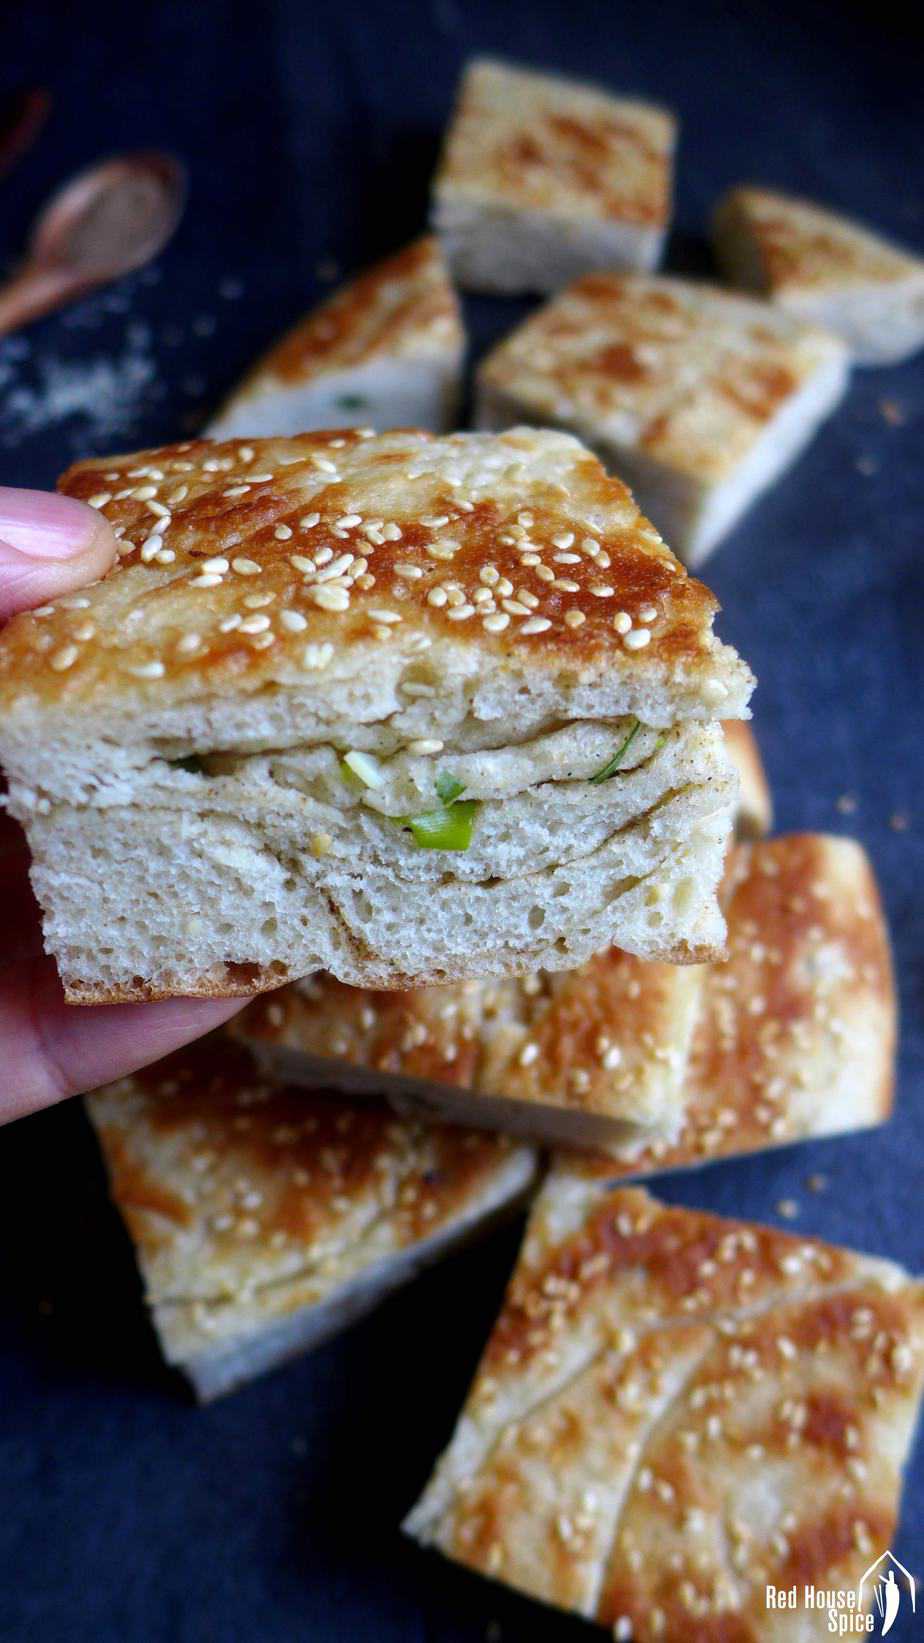 A piece of leavened scallion flatbread held by a hand